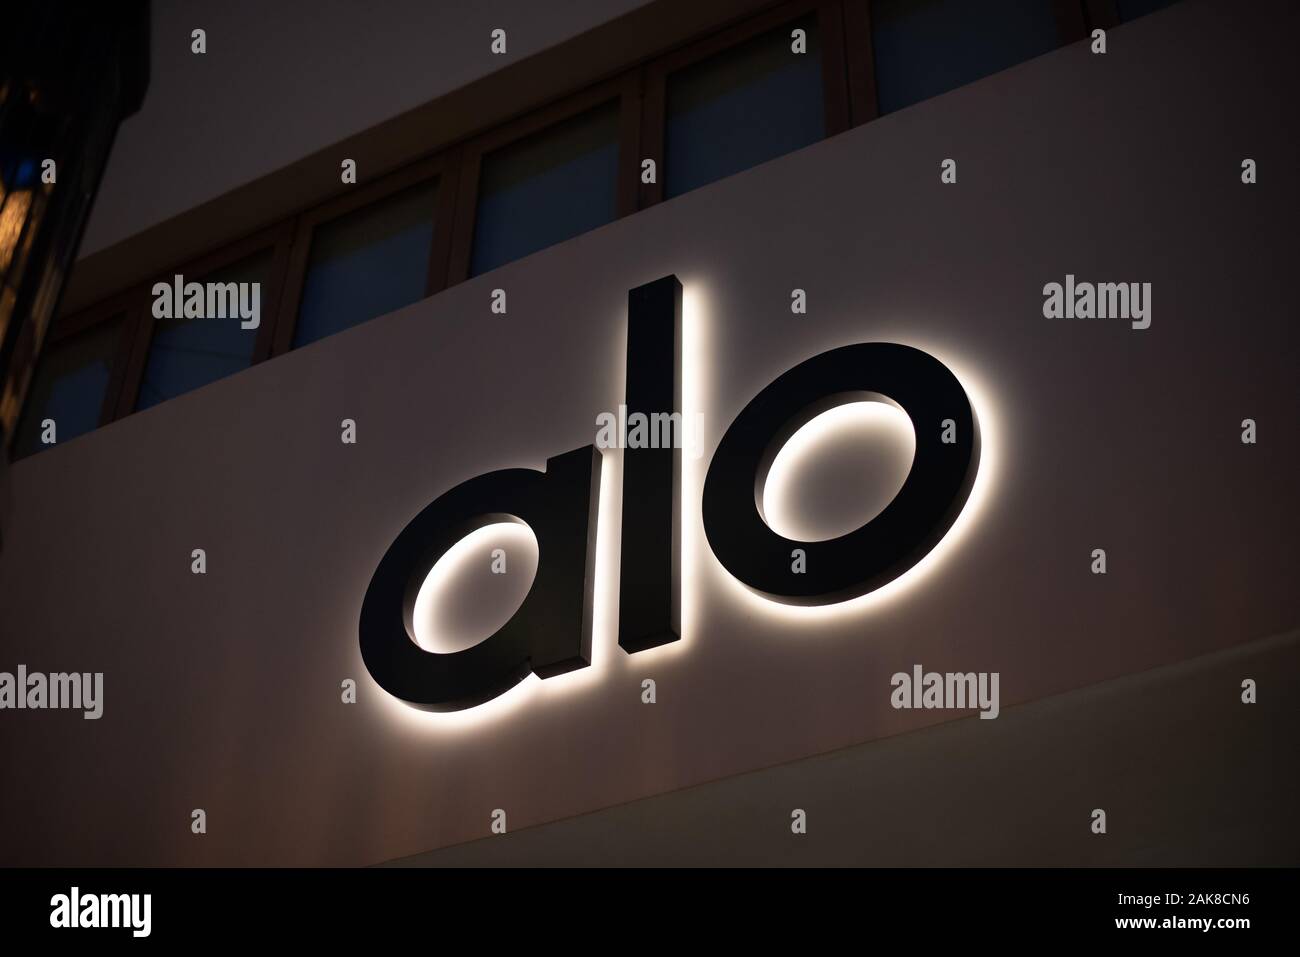 01/01/2020 - Beverly Hills, CA: Alo studio-cafe sign in Grove,Beverly Hills, LA,CA, USA. Stock Photo